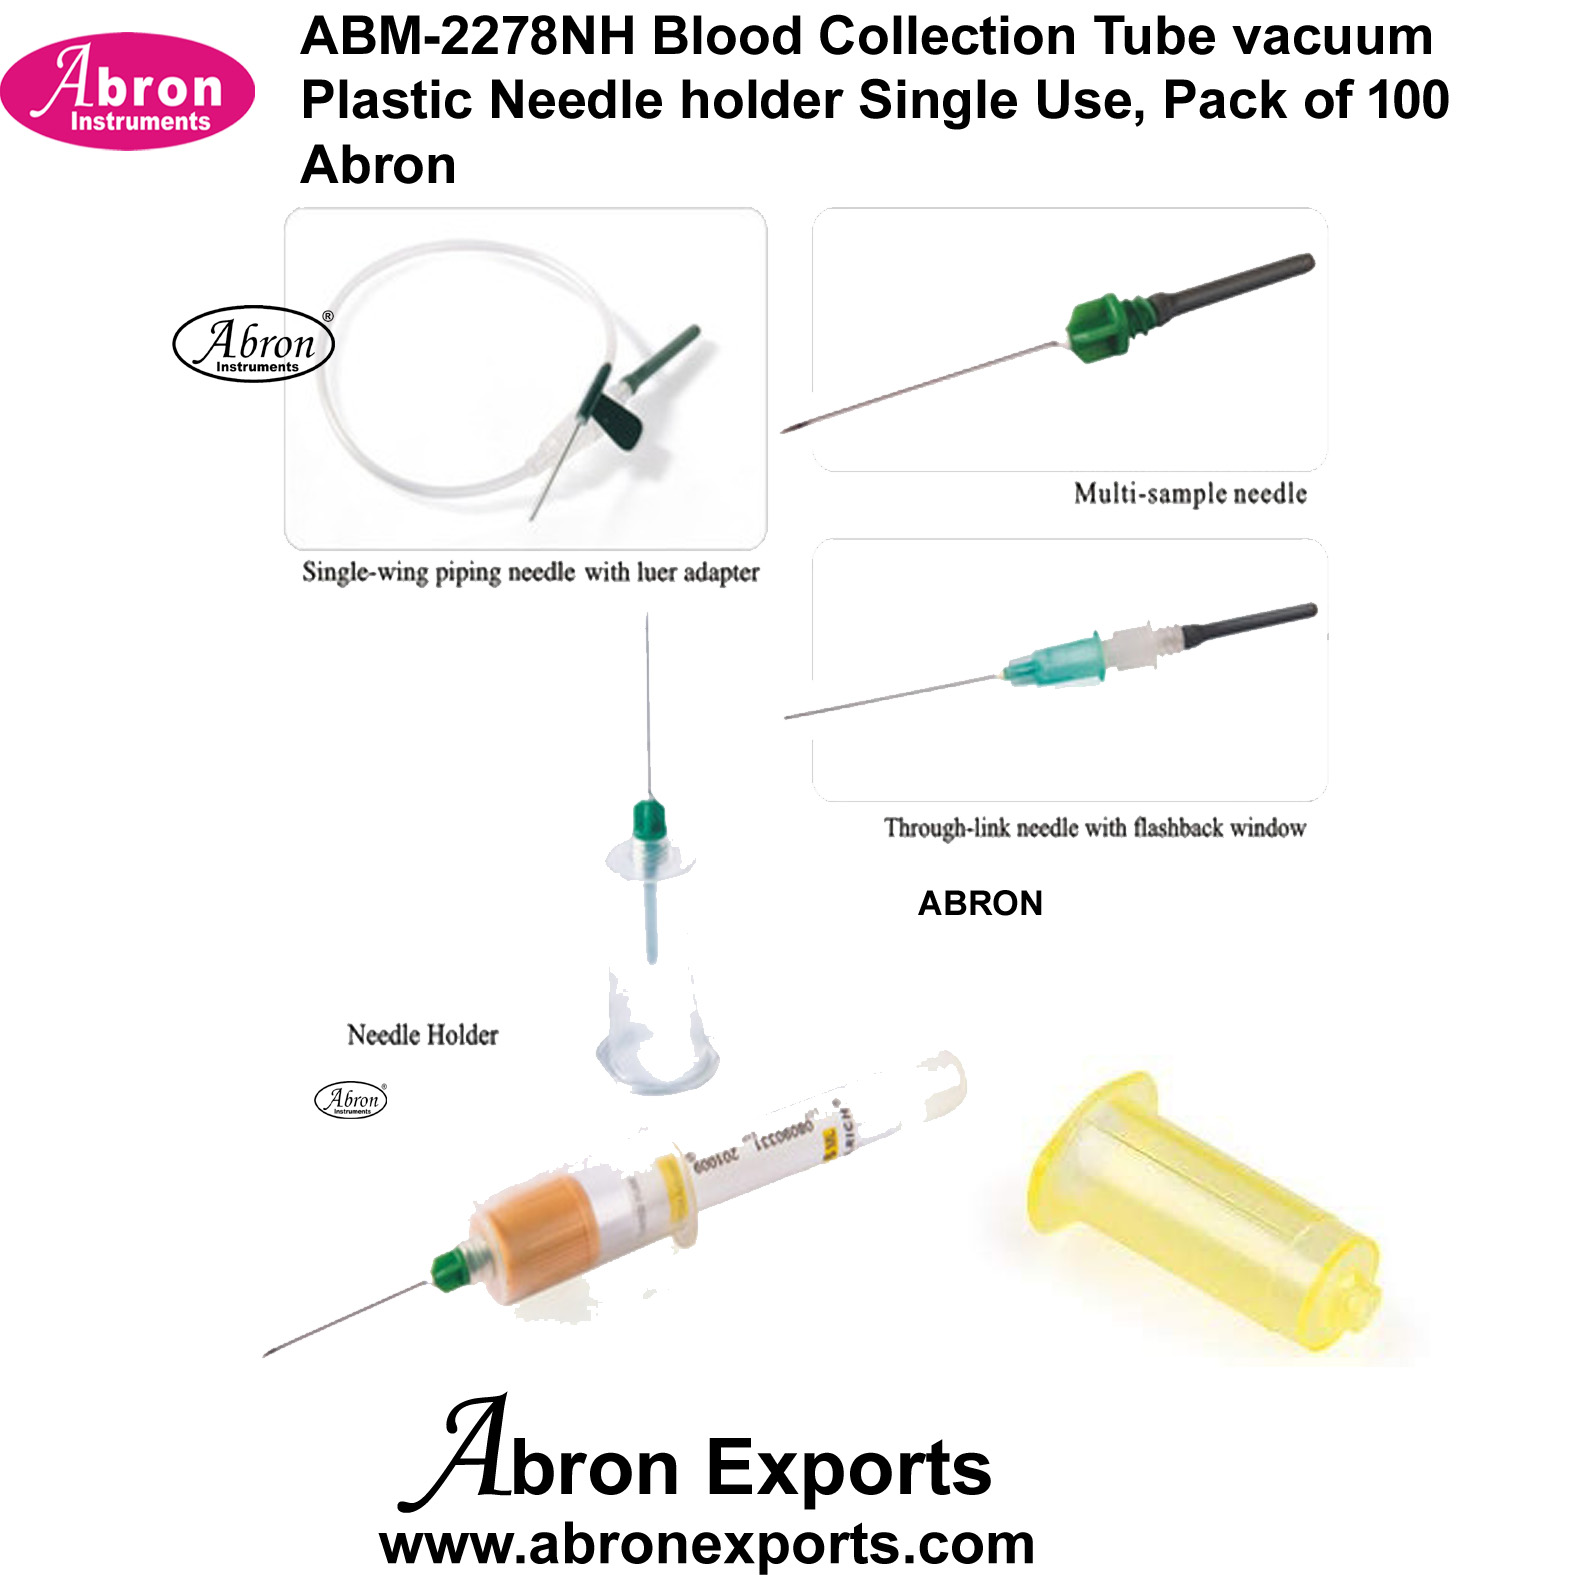 Blood Collection Tube vacuum Plastic Needle Holder Single Use Pack of 100 Abron ABM-2278NH 